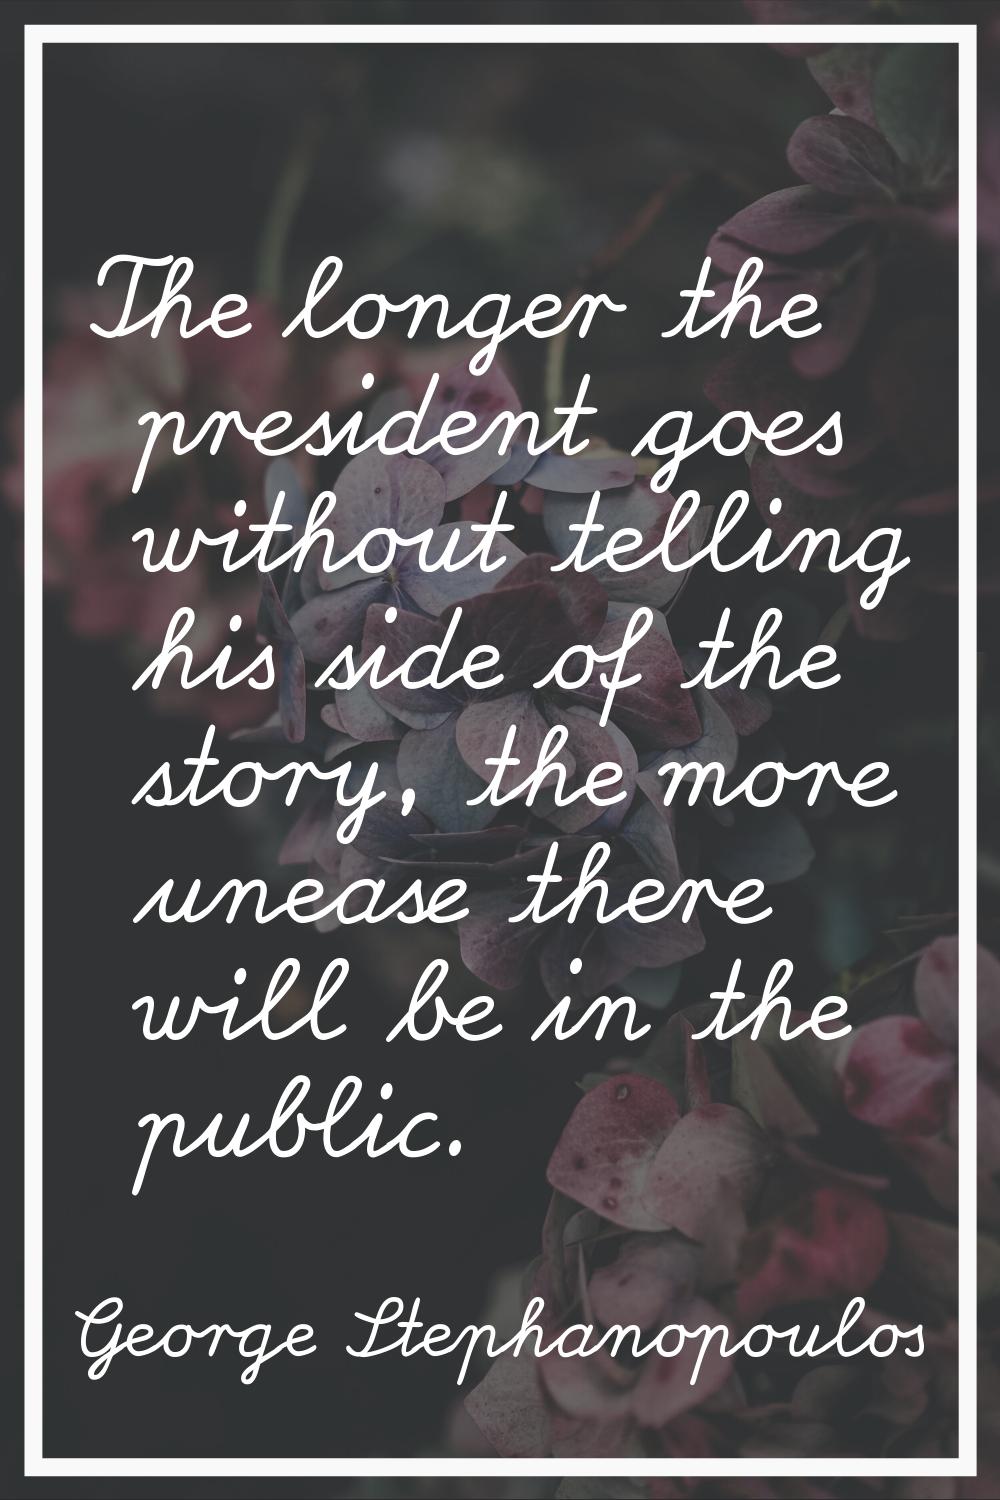 The longer the president goes without telling his side of the story, the more unease there will be 